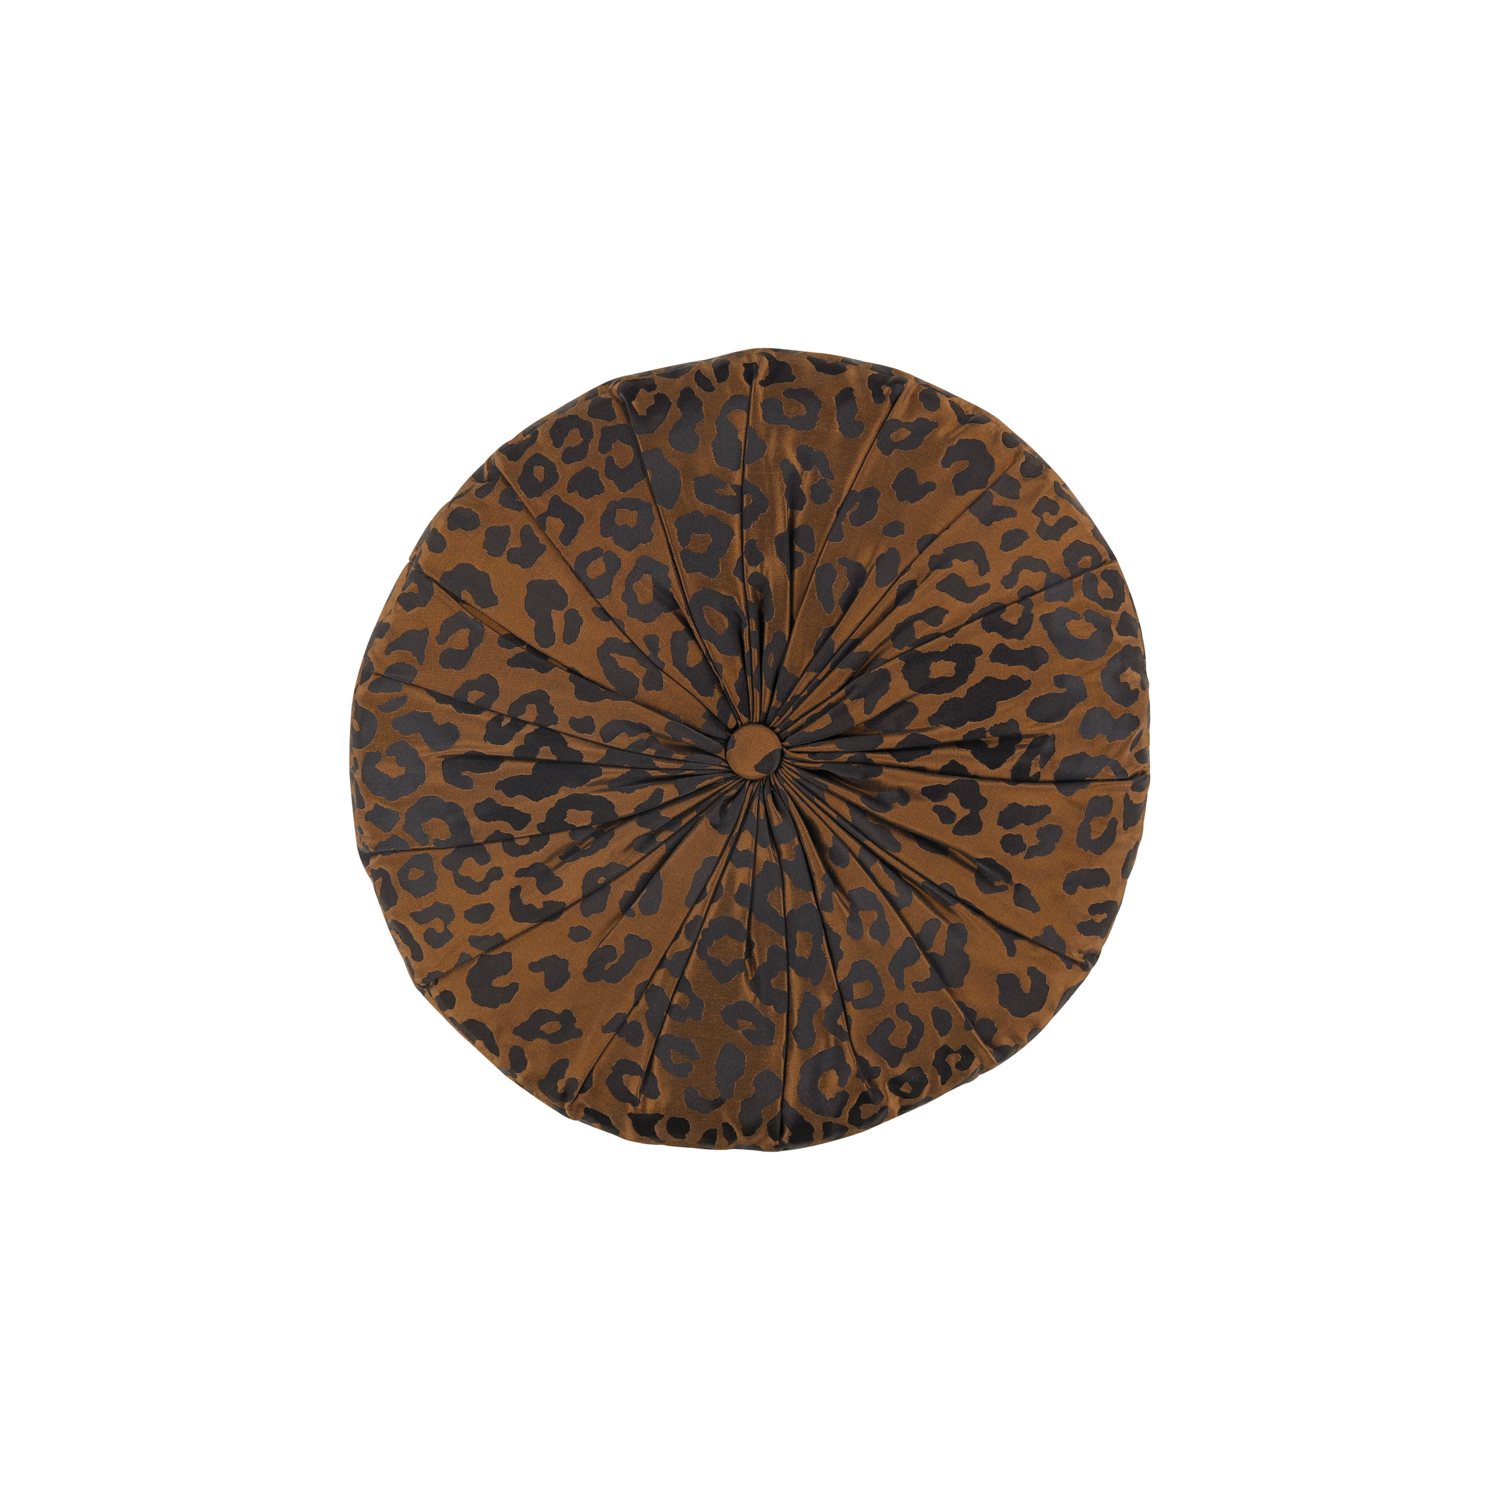 A round pillow in a leopard print that is part of the Romo x Temperley collection